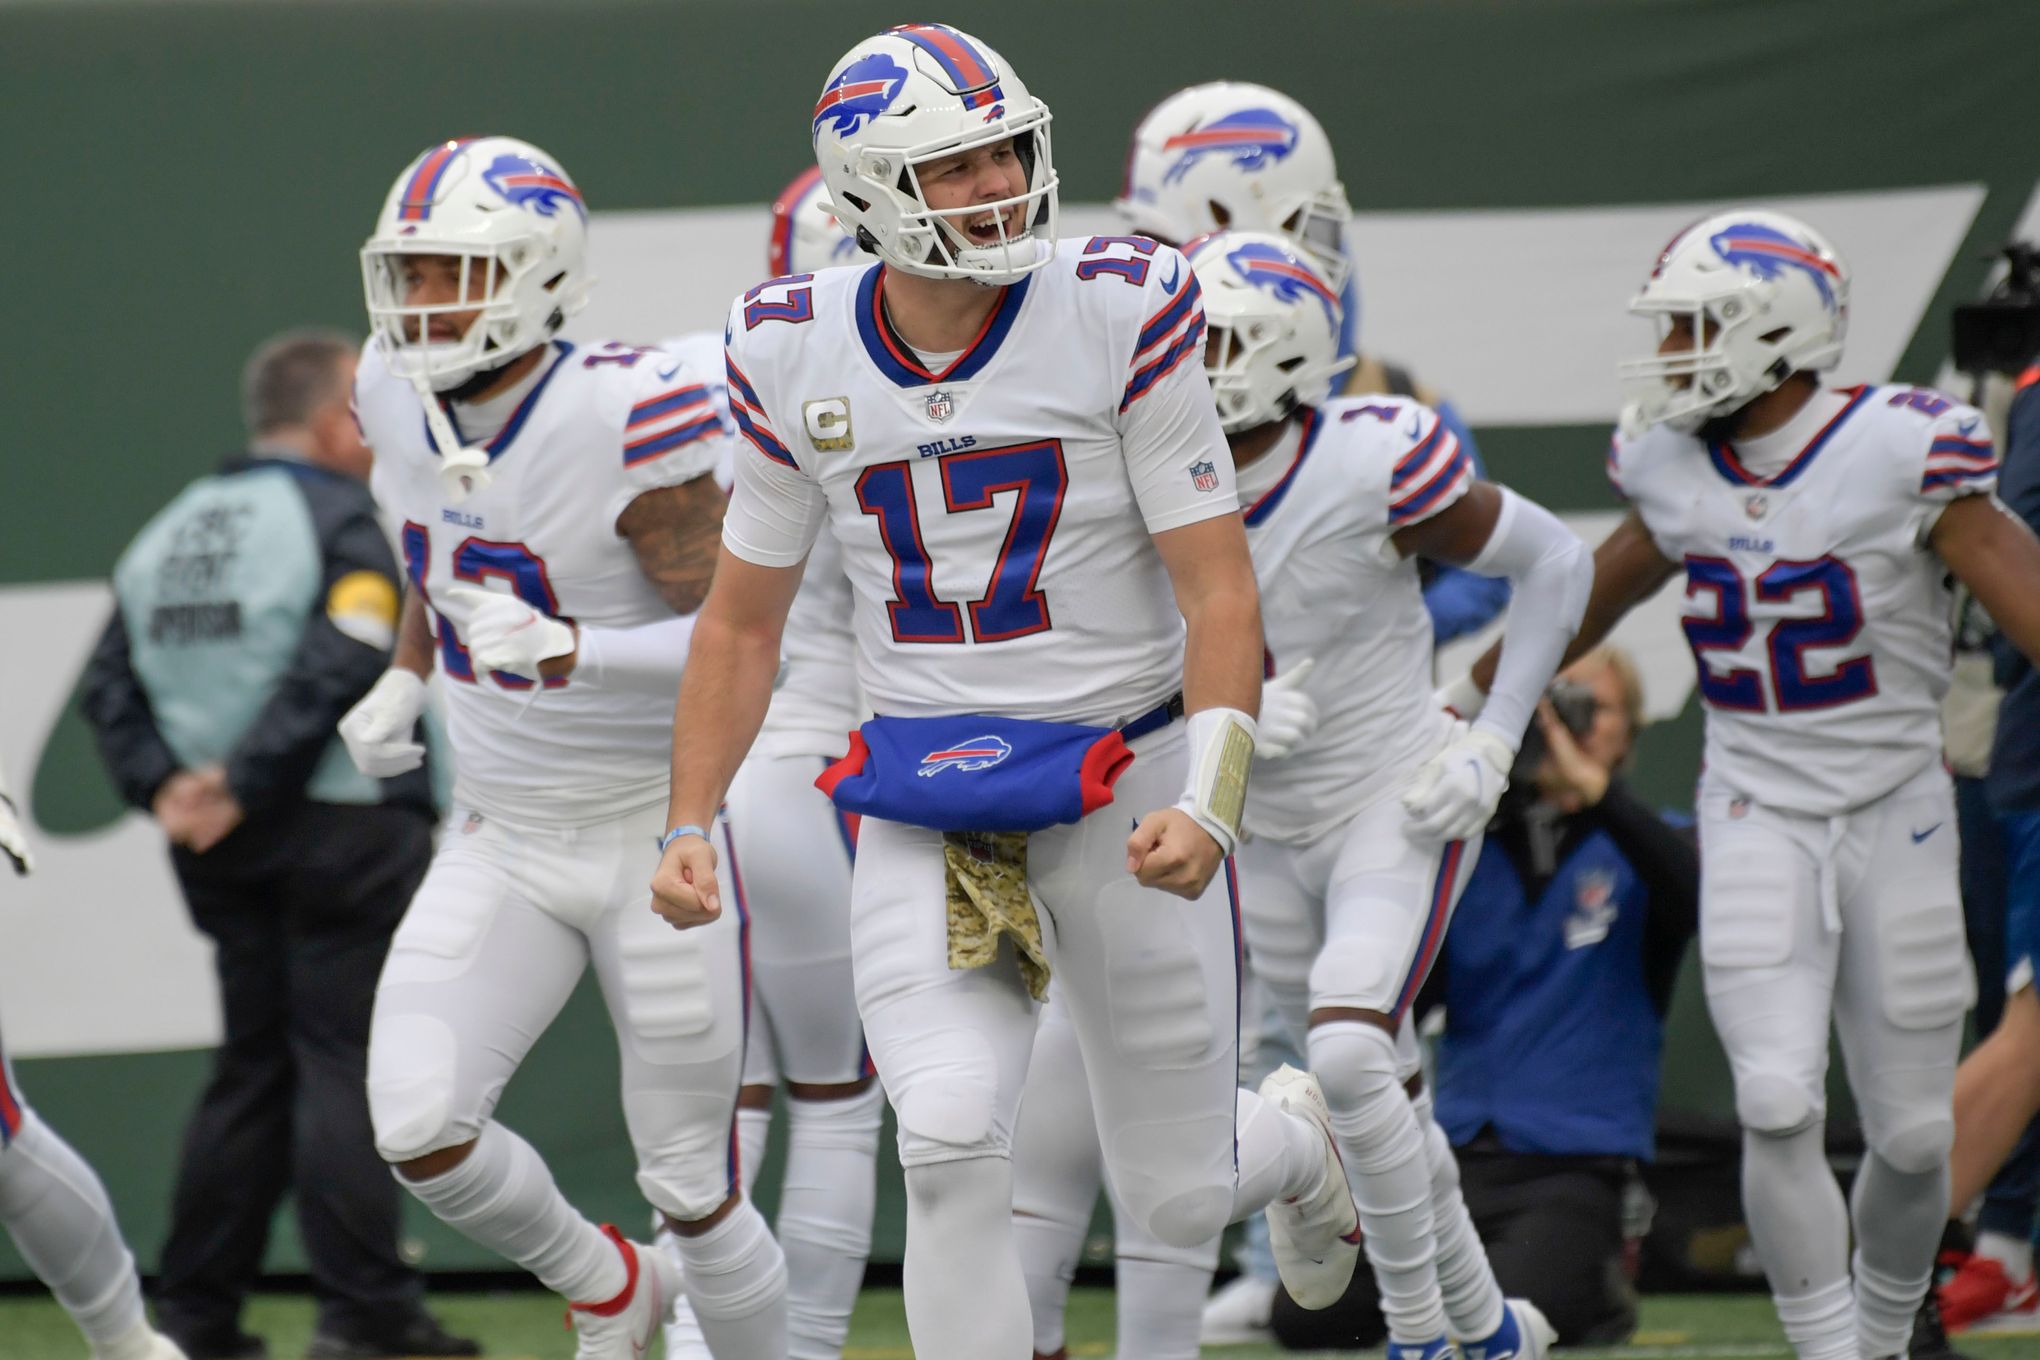 Bills Remind Dolphins Who Runs East, Wilson and Fields Fumble Away